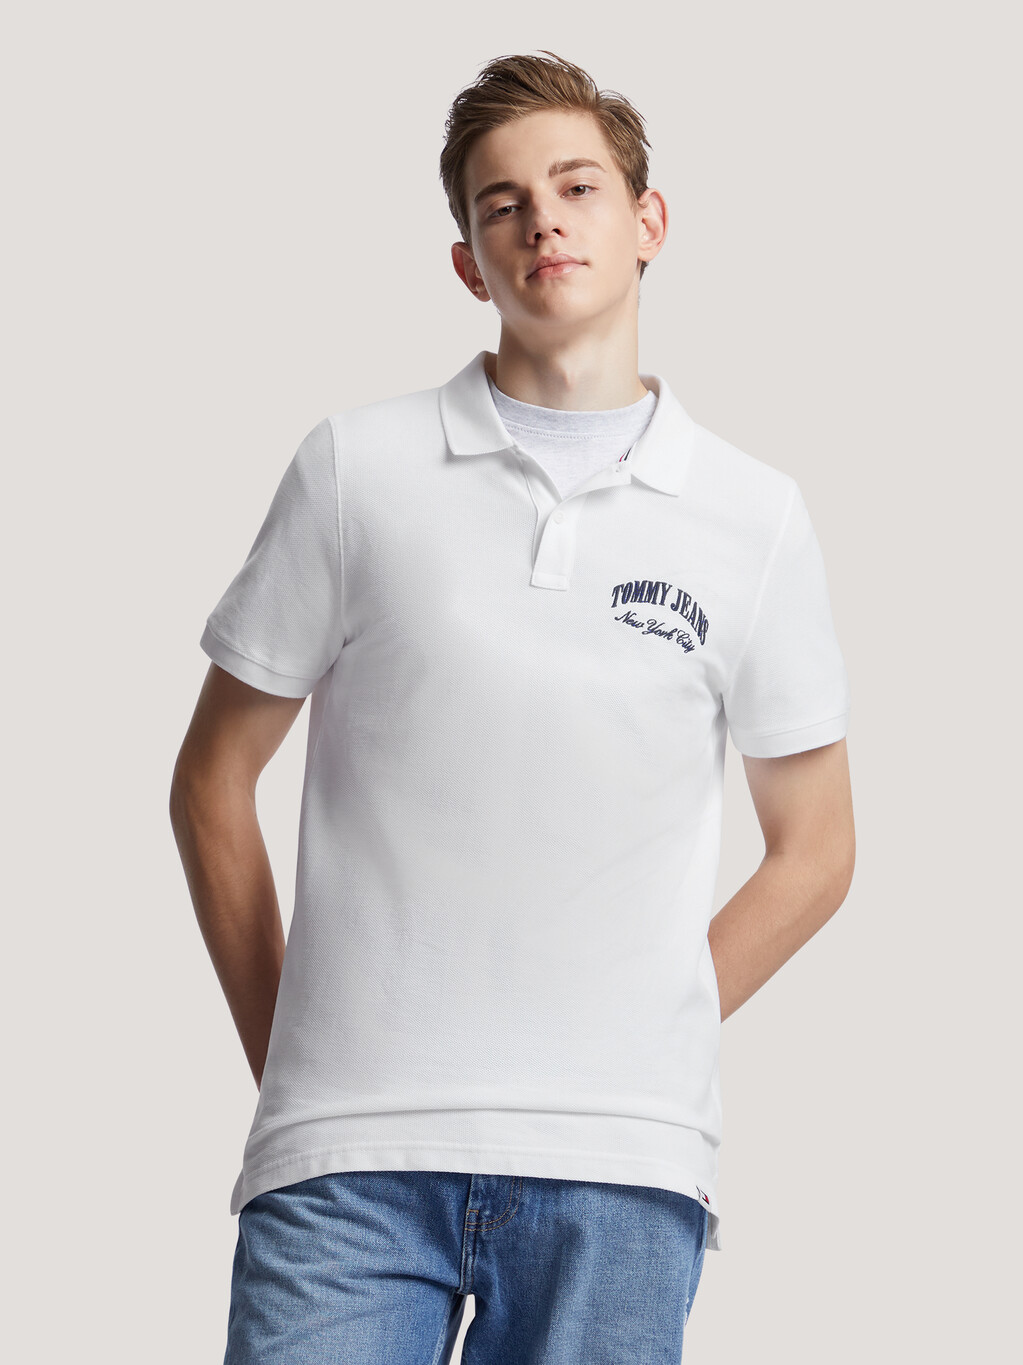 Tommy Jeans NYC Polo, White, hi-res